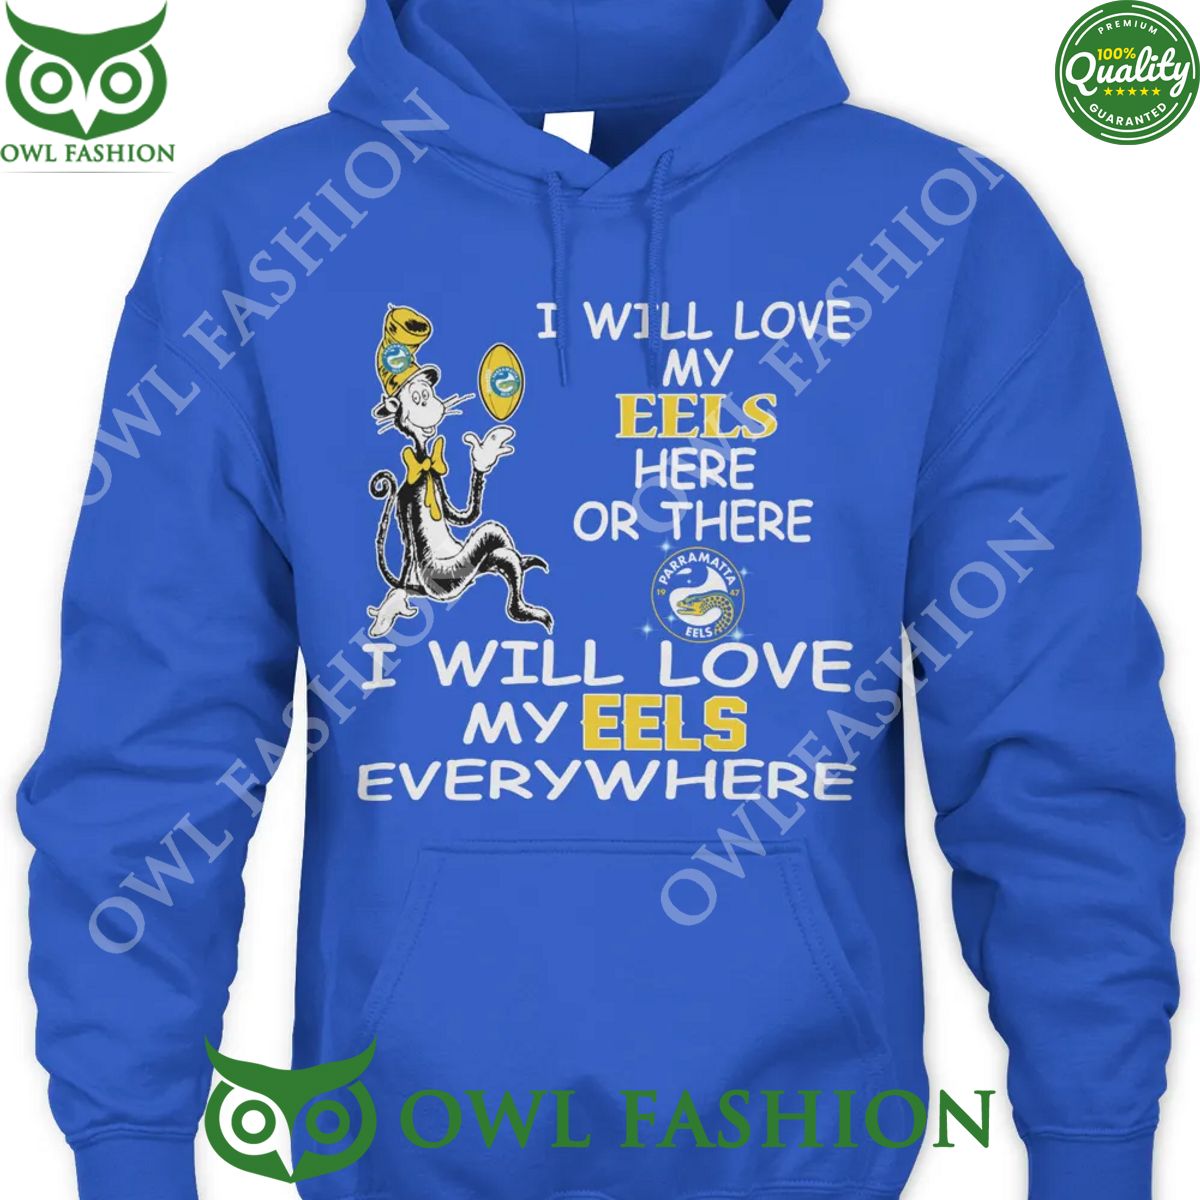 I will love my Eels here or there everywhere Eels t shirt for NRL fans